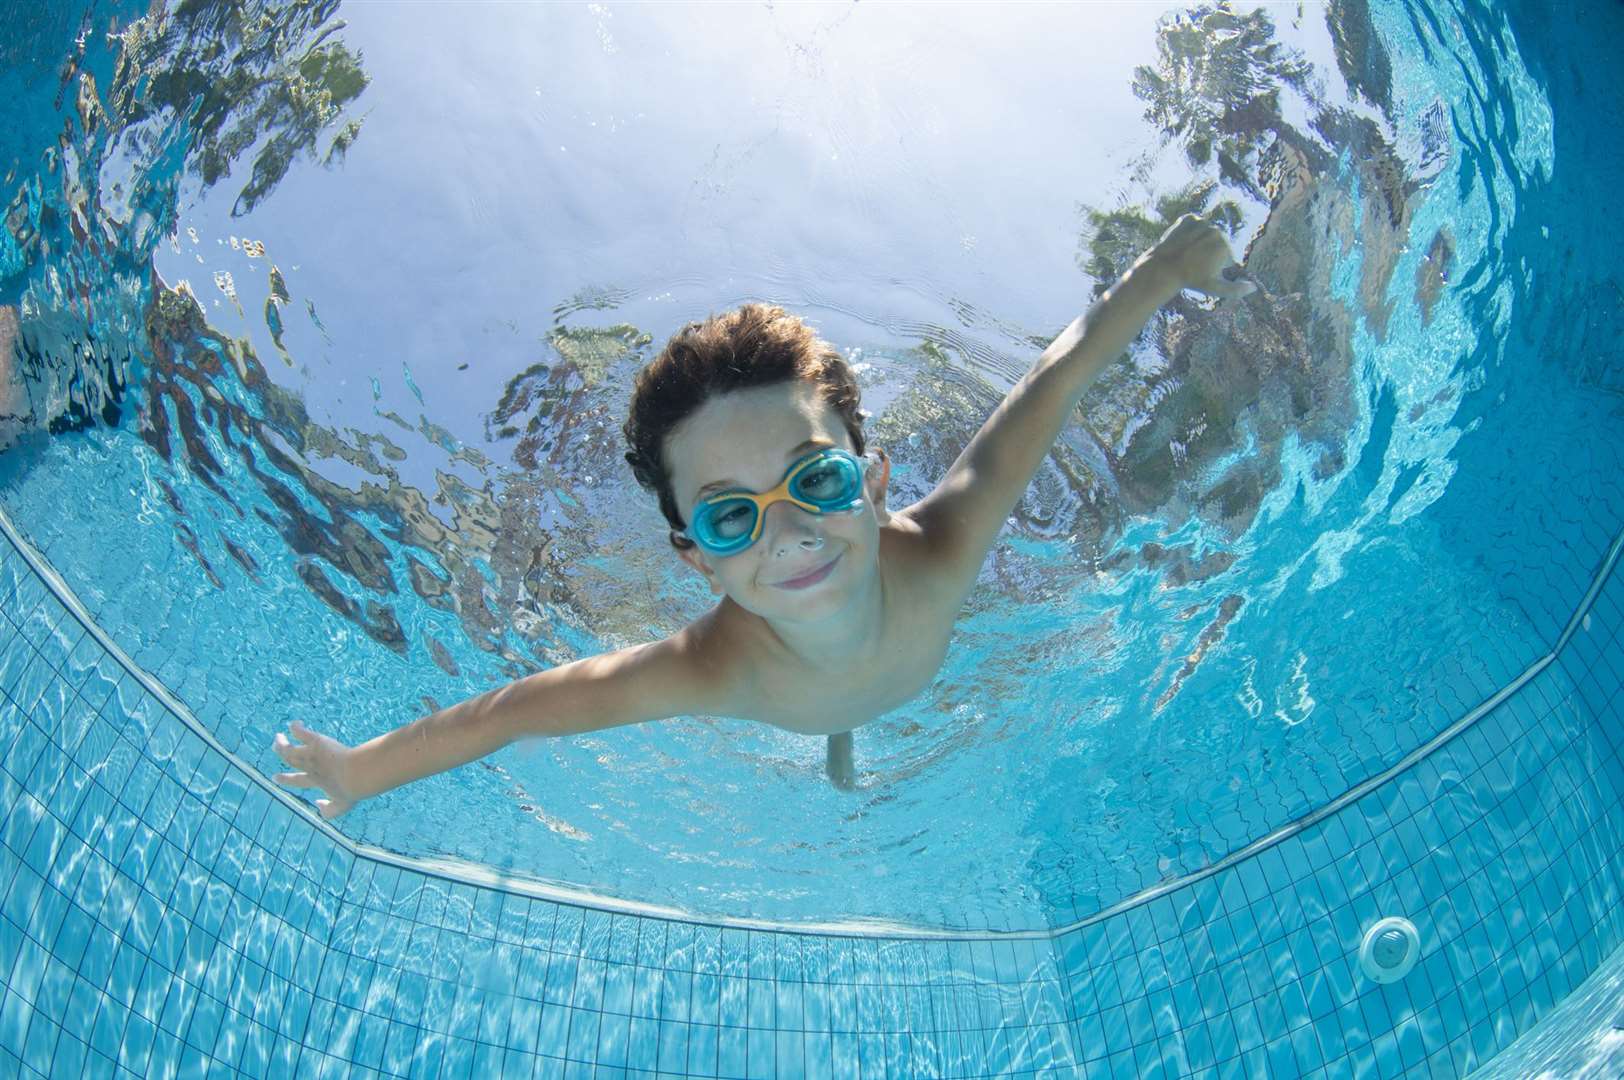 Tight fitting Speedo type swimming trunks might be worn in France in public pools. Image: iStock